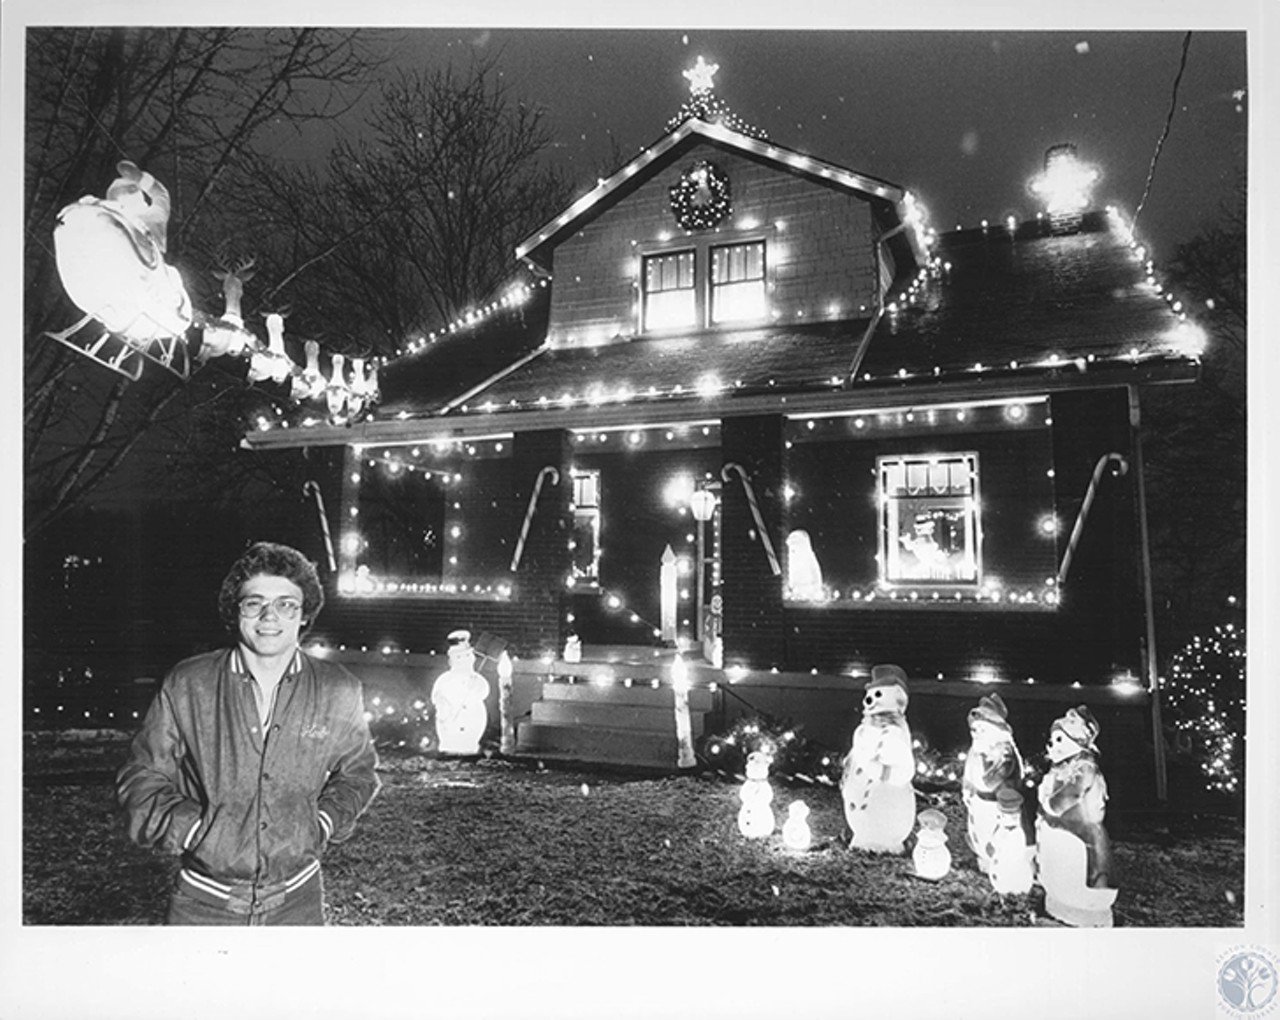 Richwood, 1980
"Christmas decorations, Doug Robinson in front of parent's home, Shirley & G.L. Robinson"